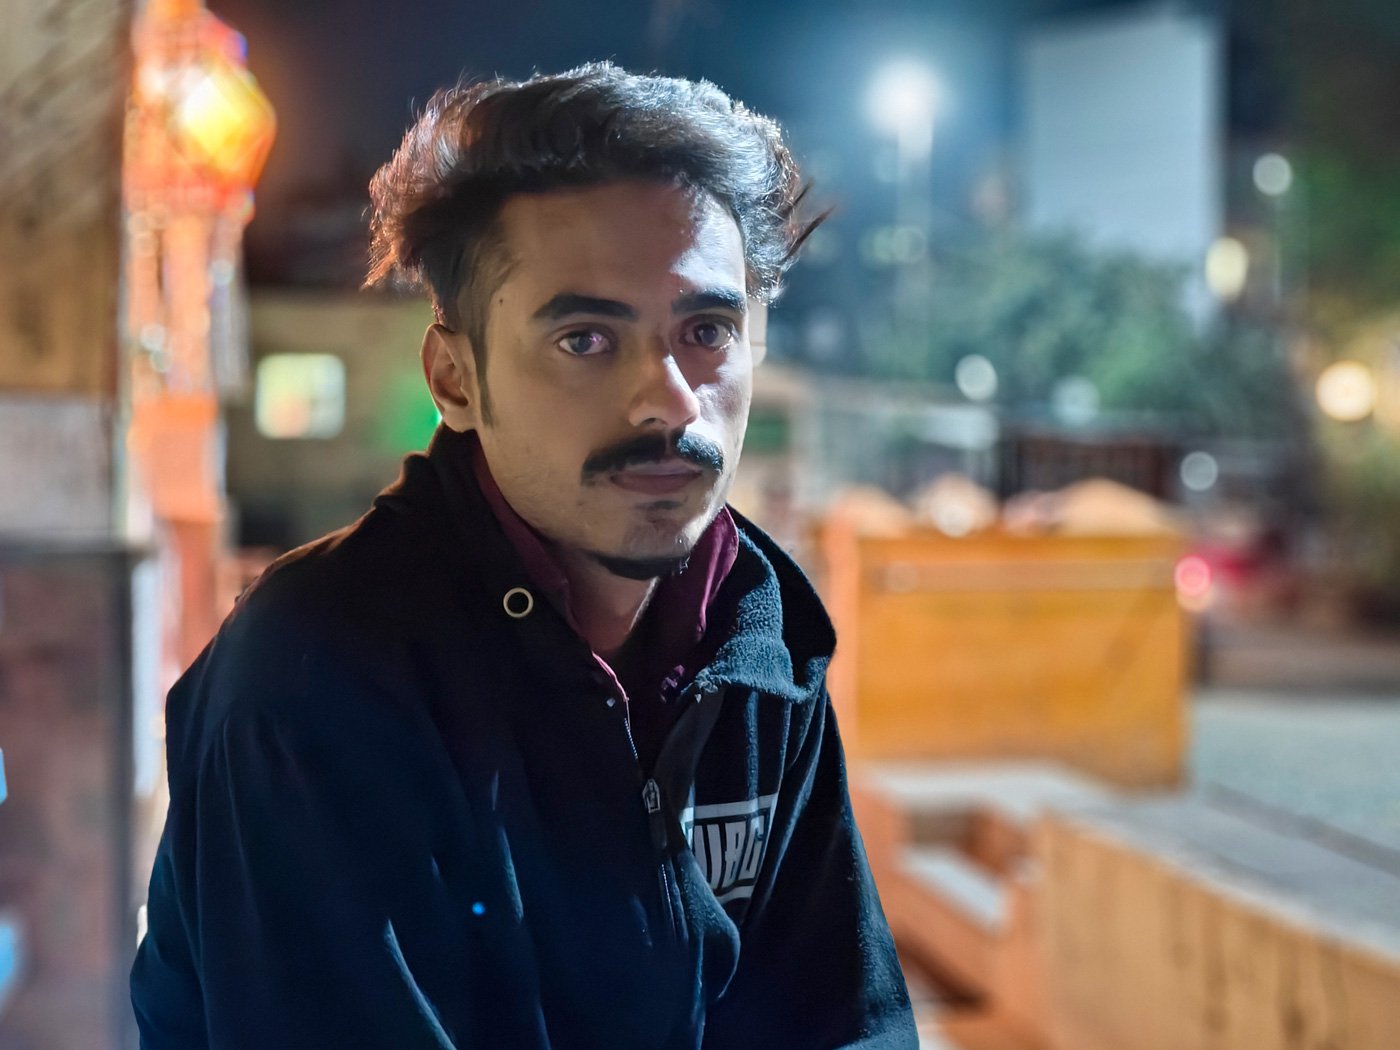 'In India, you are supposed to be innocent until proven guilty,' says Muzammil Bagwan, 23, at an undisclosed location. Bagwan, who is from Pusesavali, was accused of abusing Hindu gods under an Instagram post